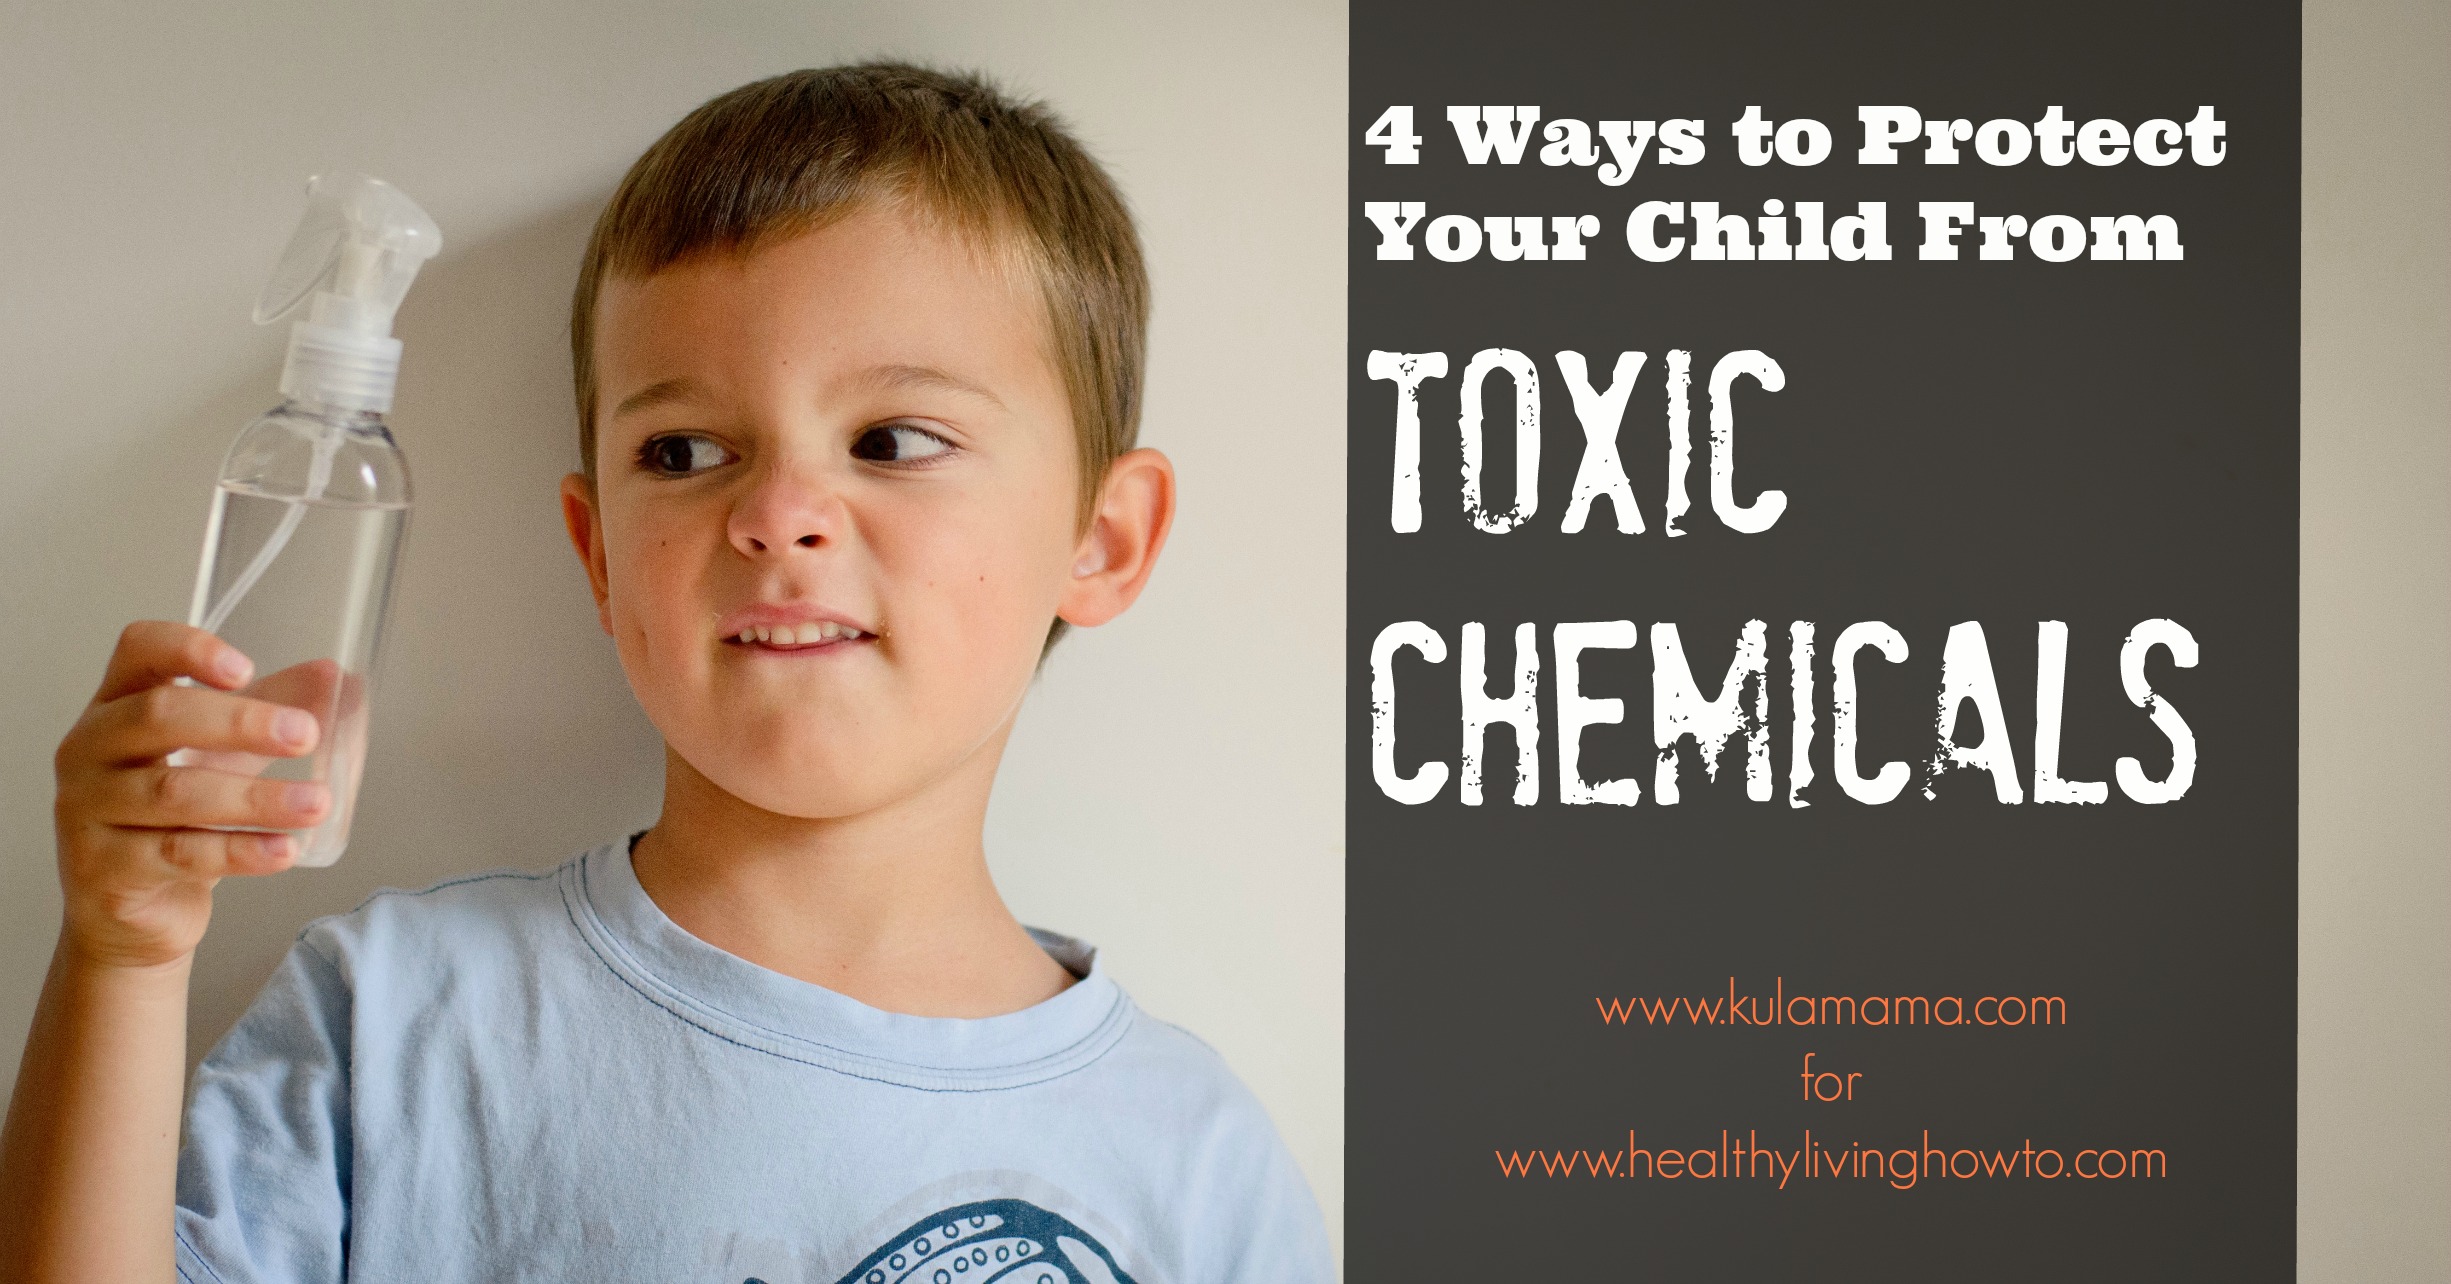 4 Ways to Protect Your Child From Toxic Chemicals